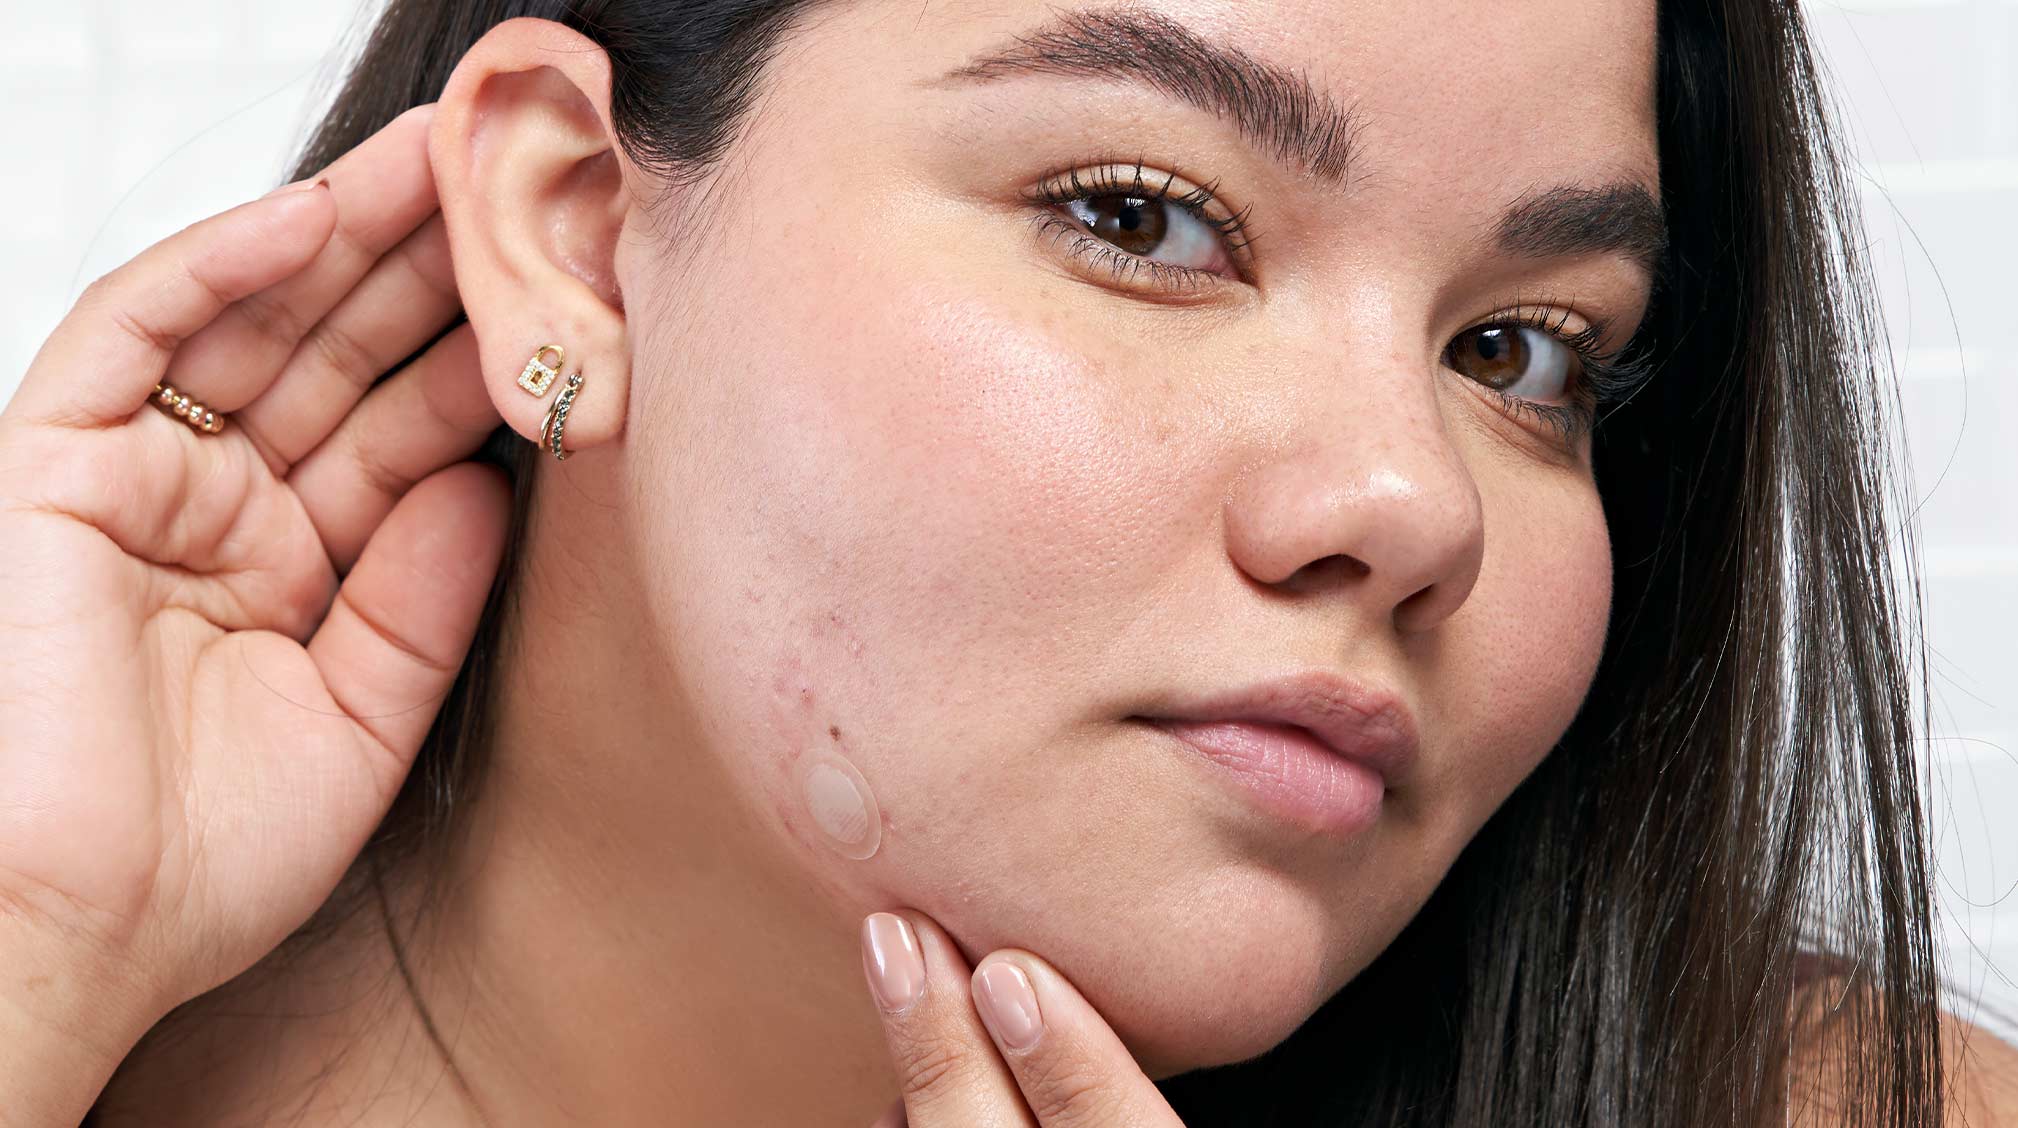 Dealing with Post-inflammatory Erythema: Fade Red Marks after Acne